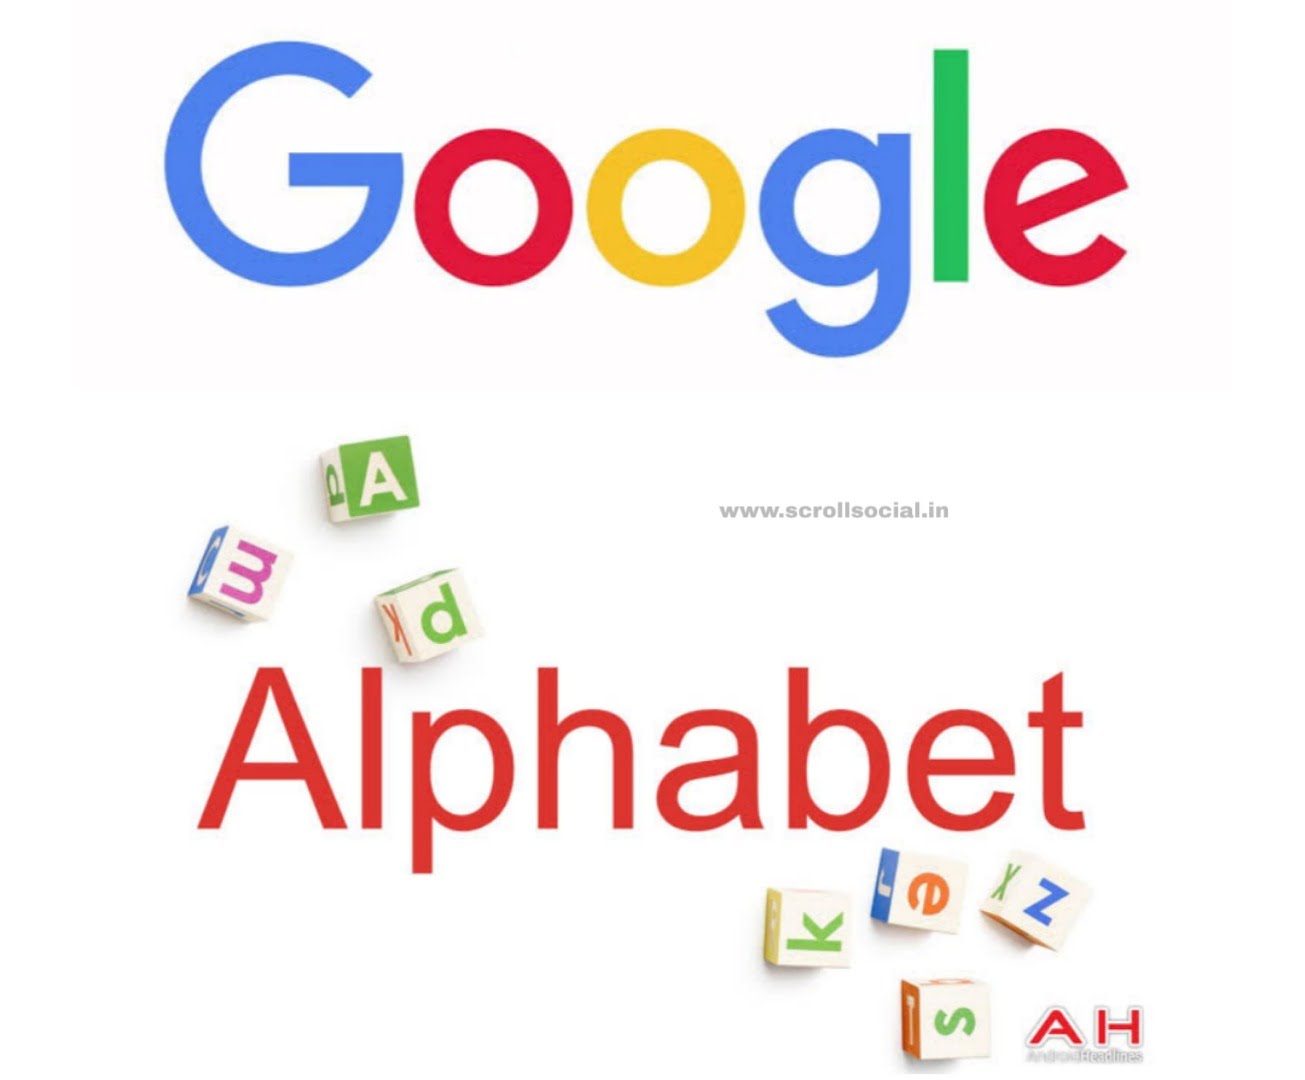 Alphabet Inc: Alphabet a parent company of Google and many other subsidiaries of Alphabet making profits